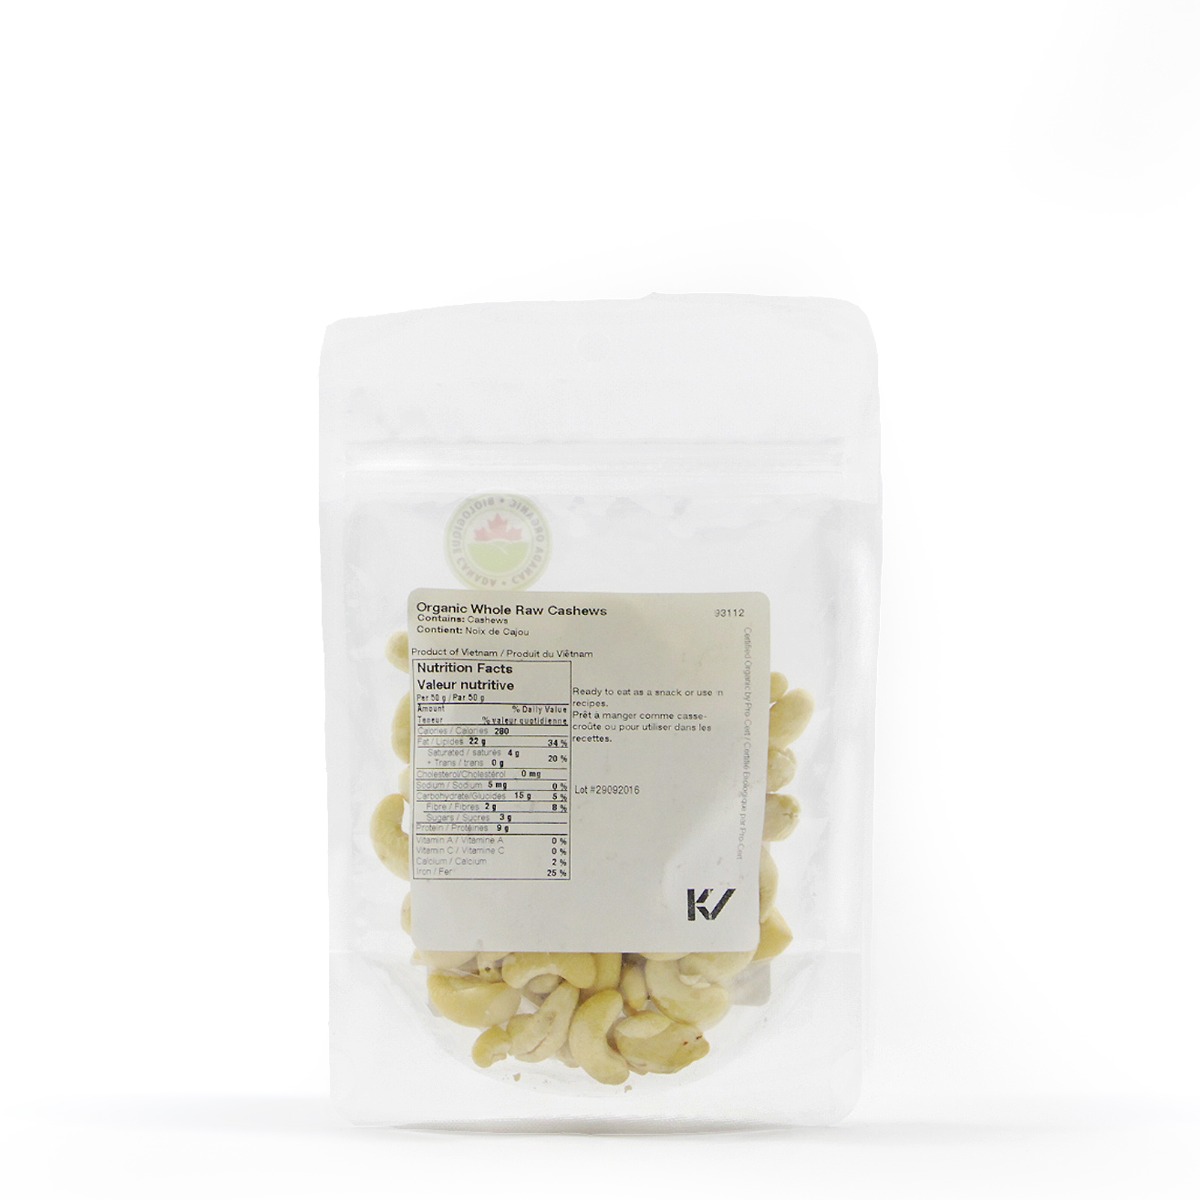 Nutritional Information for Real • Organic Whole Raw Cashews